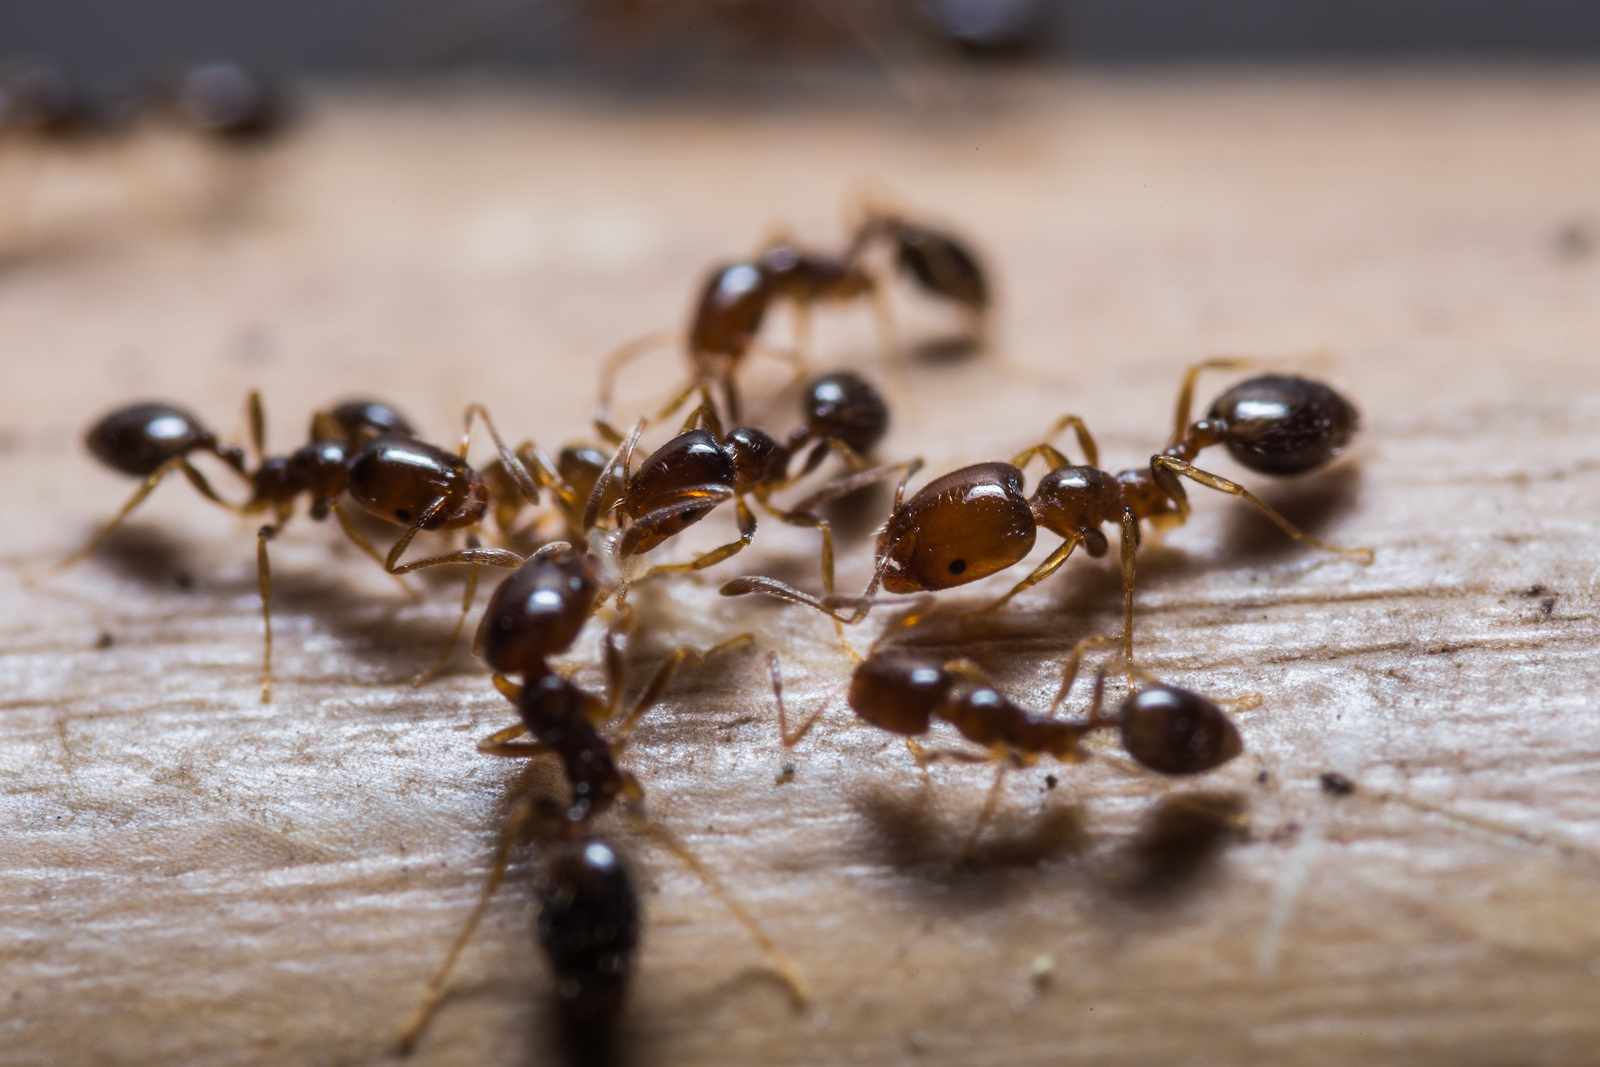 How To Get Rid Of Ants In The Kitchen Non Toxic Homemade Remedies